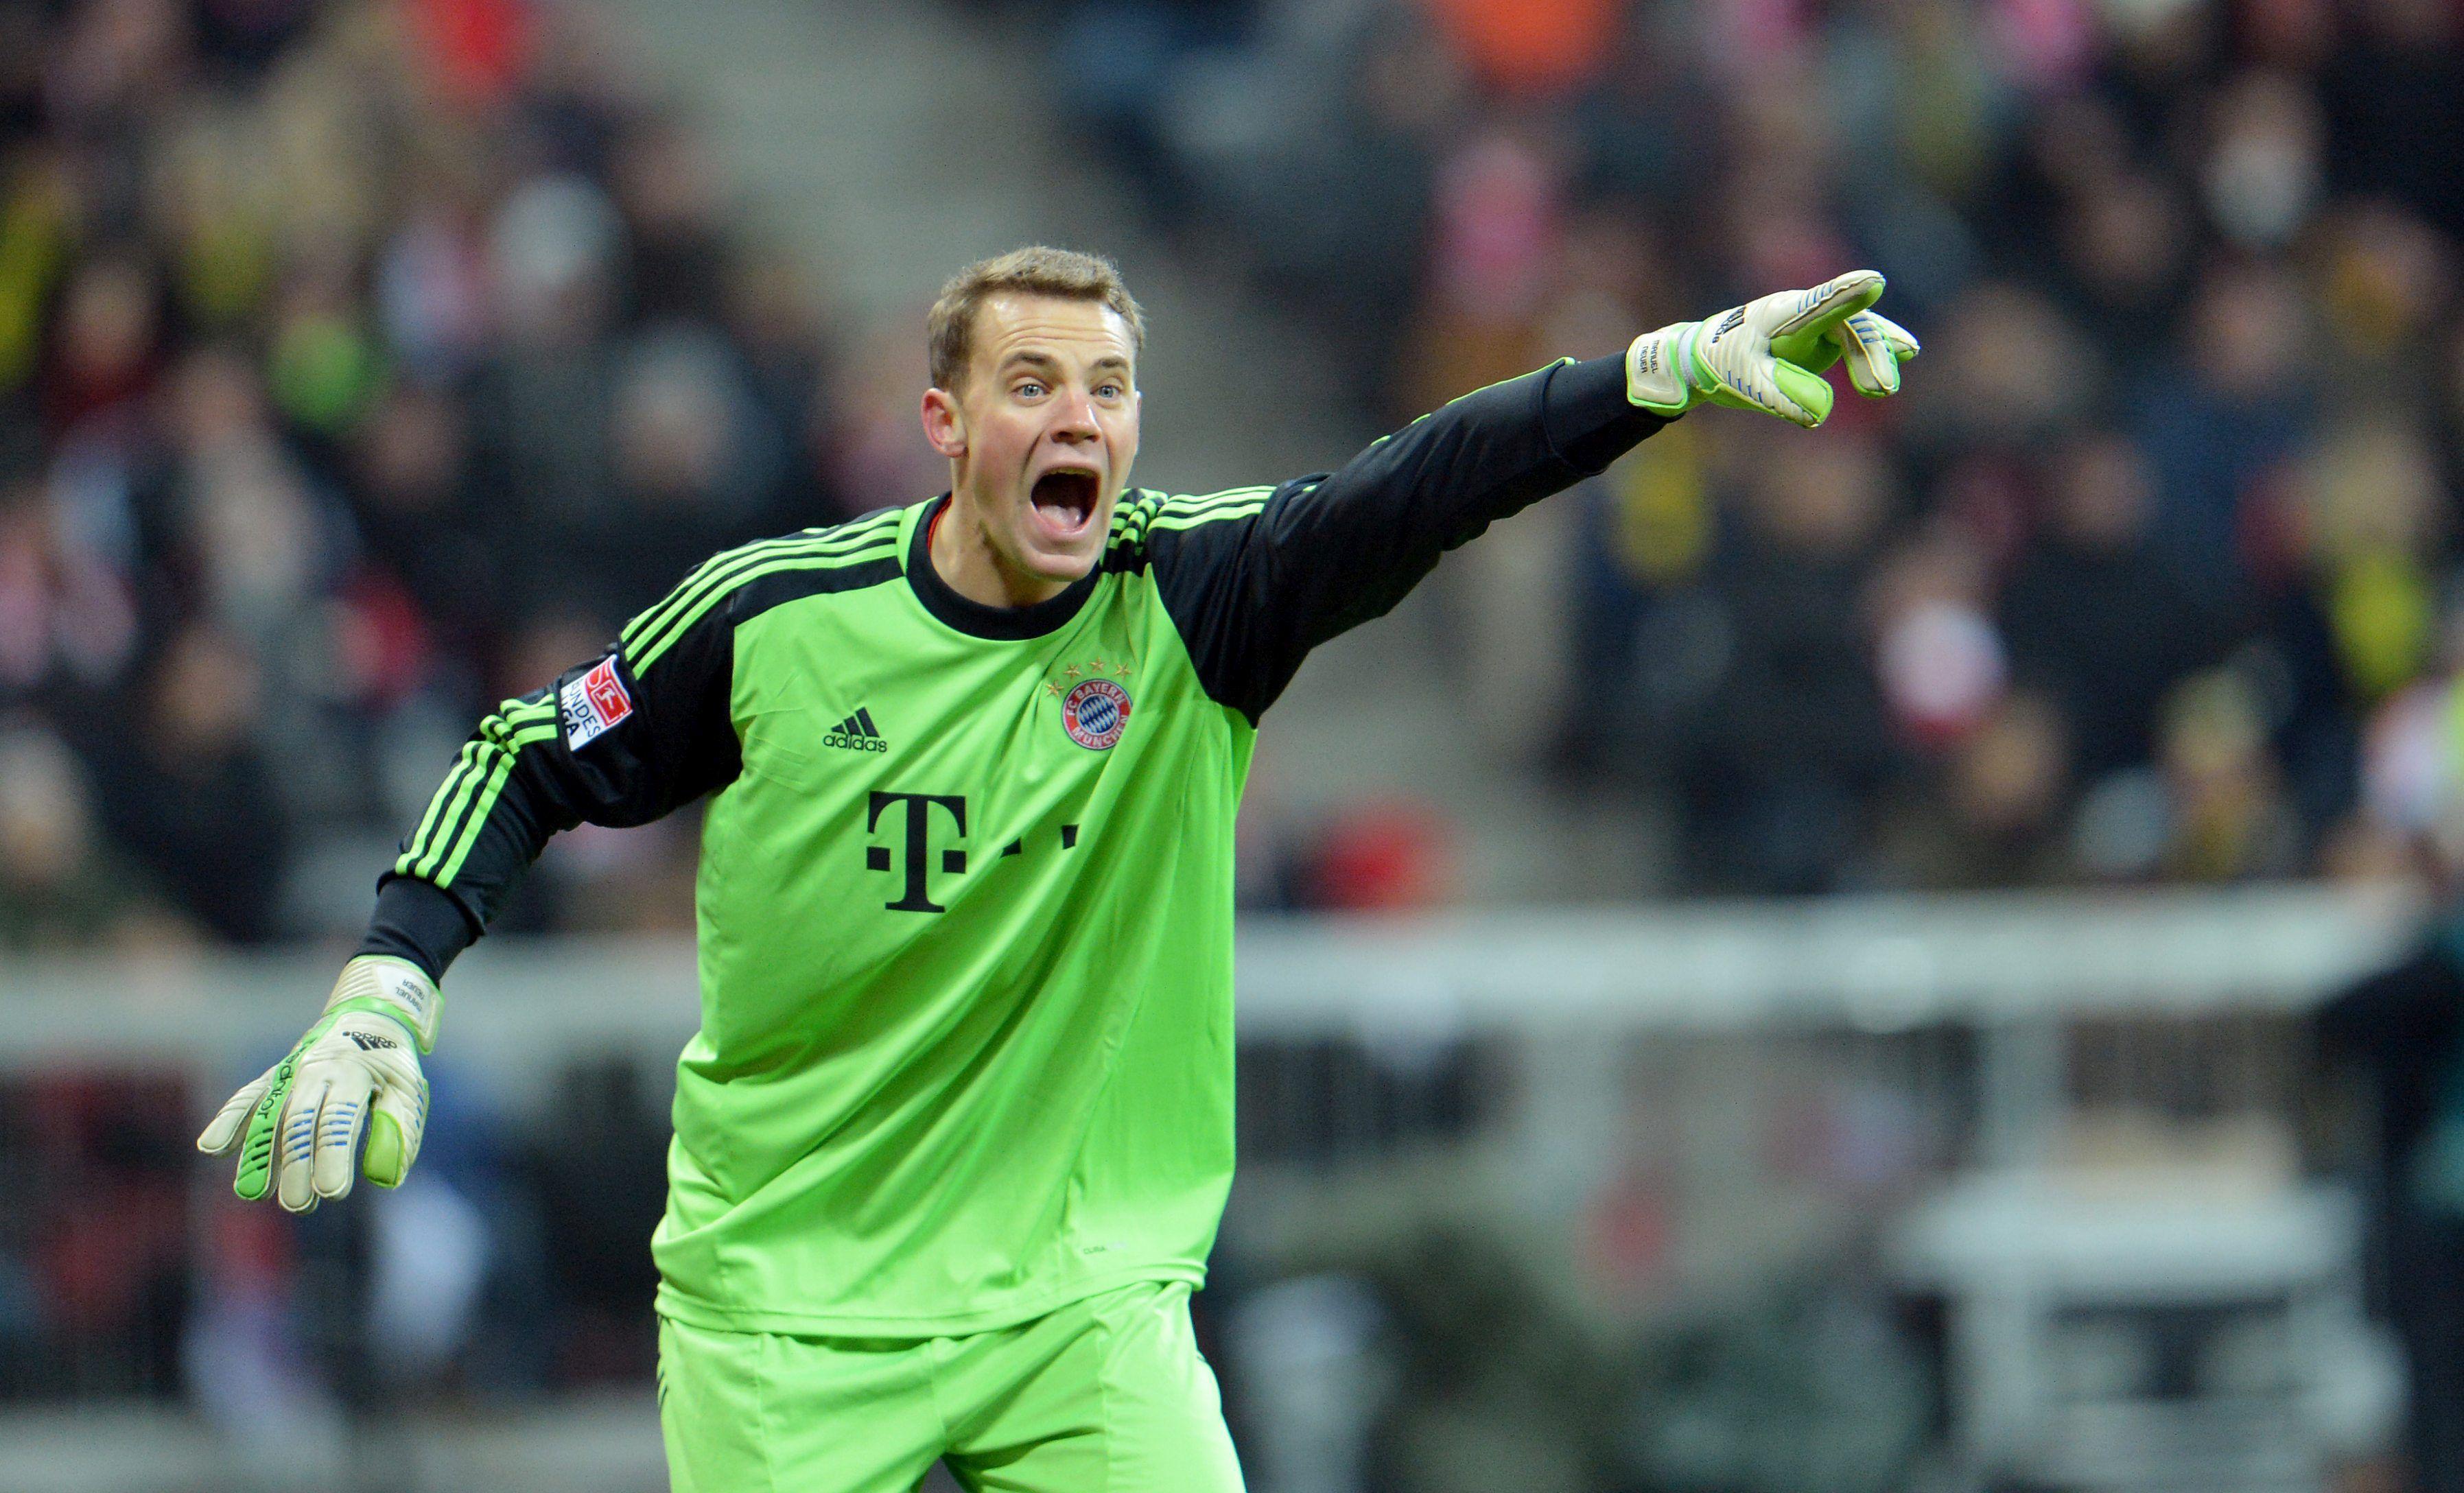 image about Manuel Neuer HD Image. Football